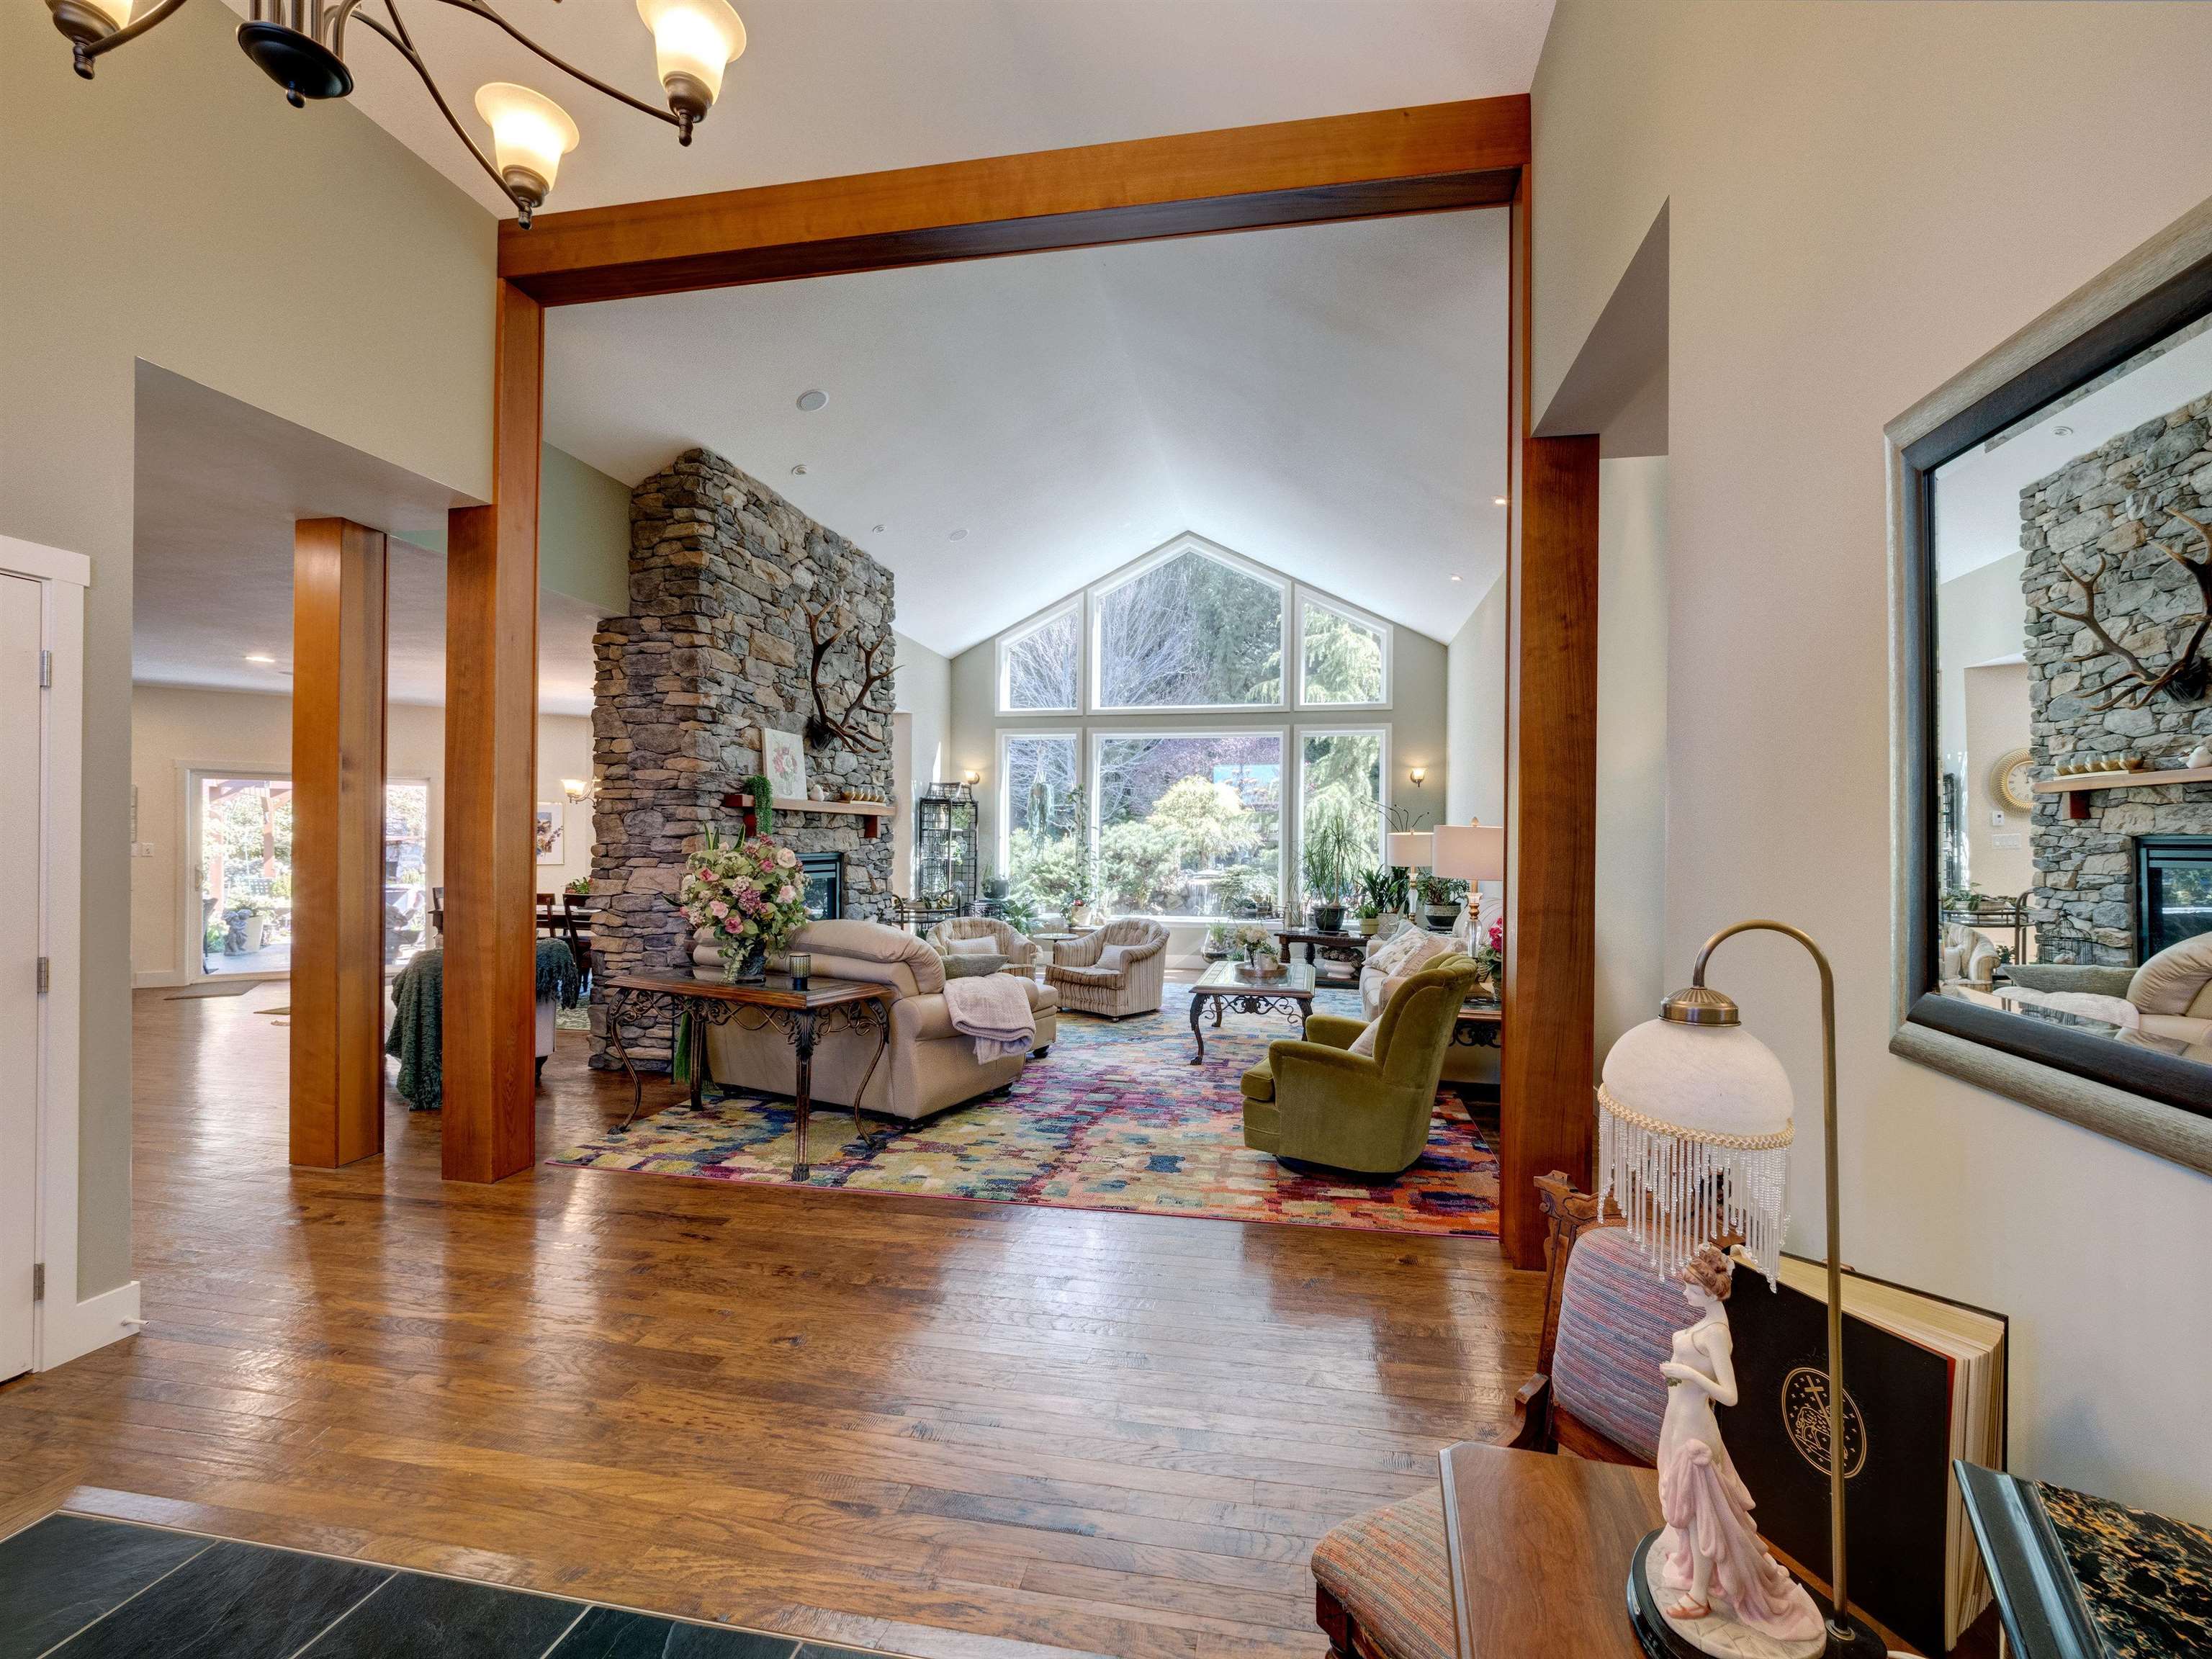 Listing image of 5312 STAMFORD PLACE